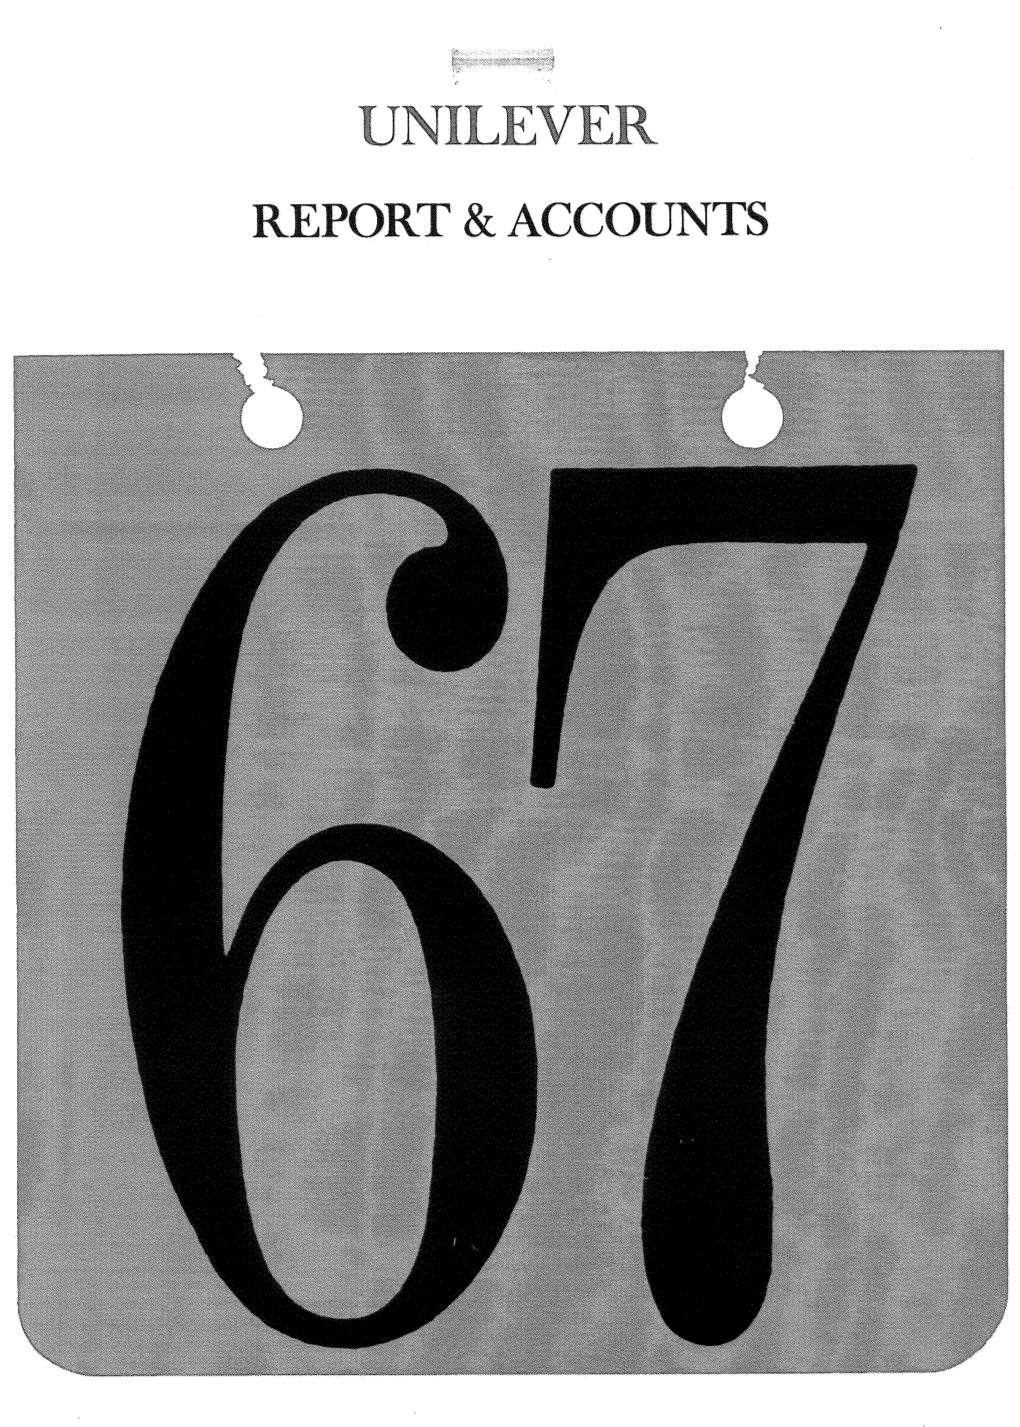 1967 Annual Report and Accounts